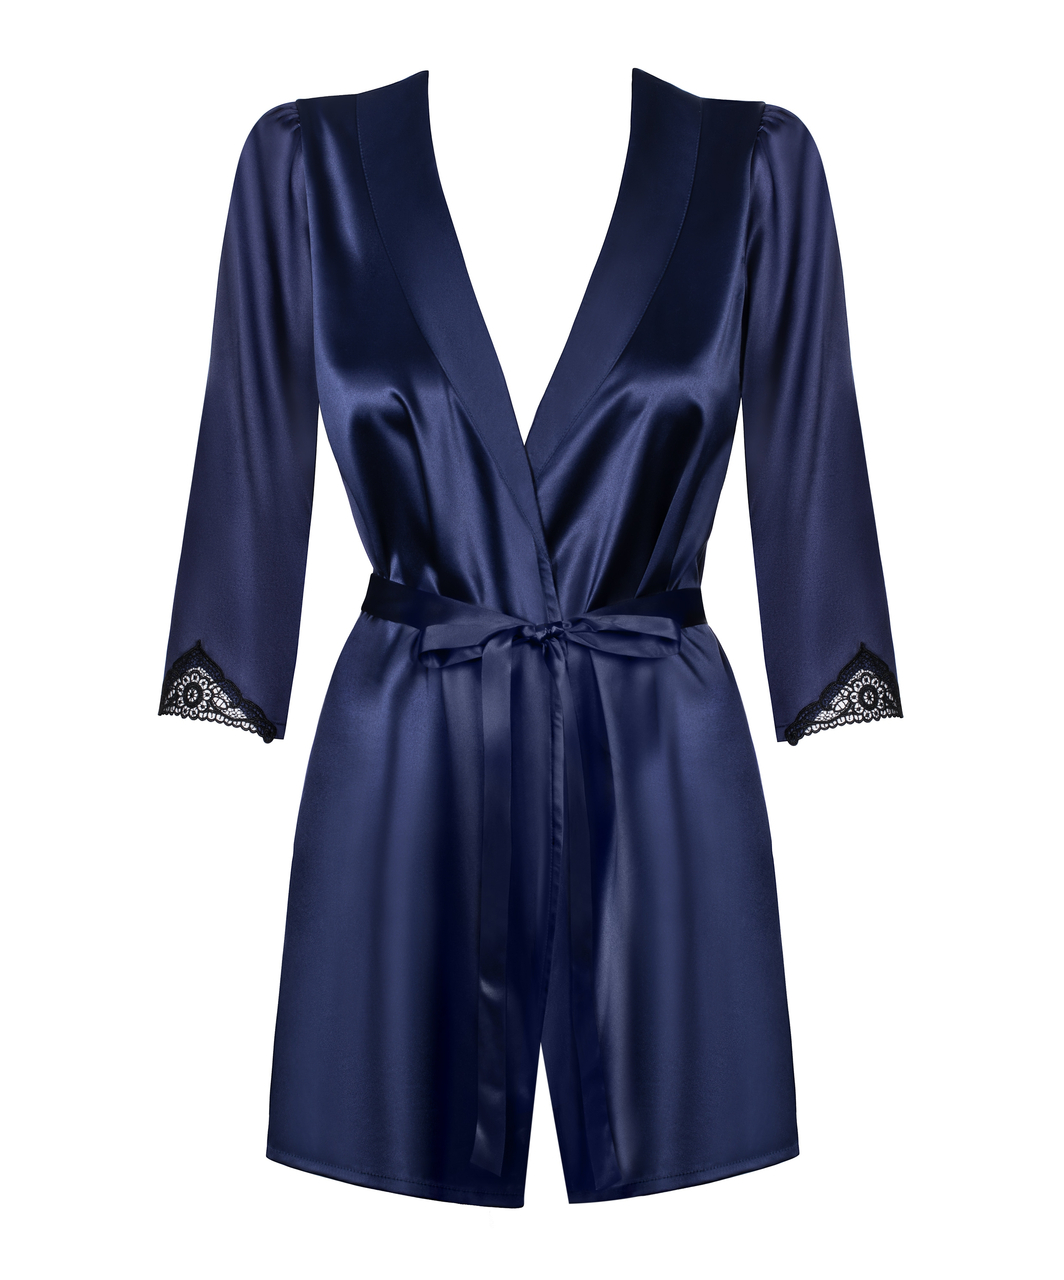 Obsessive navy blue robe with string